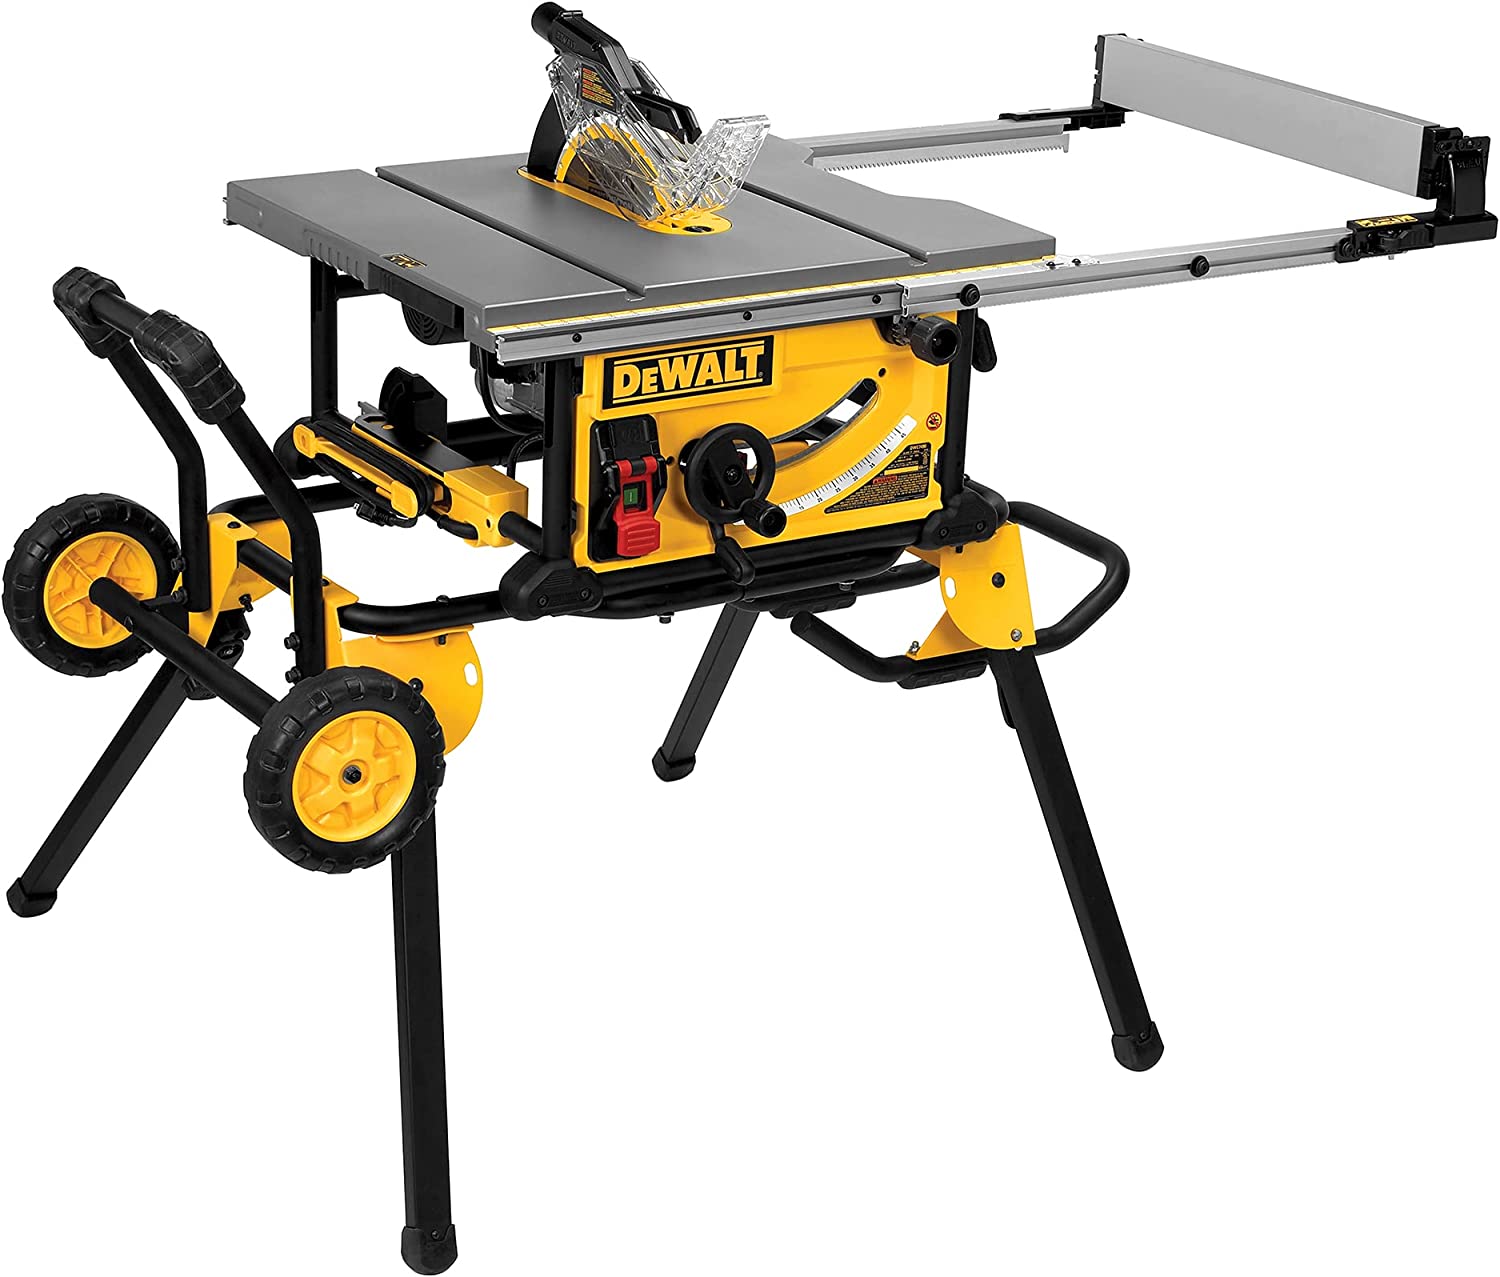 Best Table Saw for DIY Projects